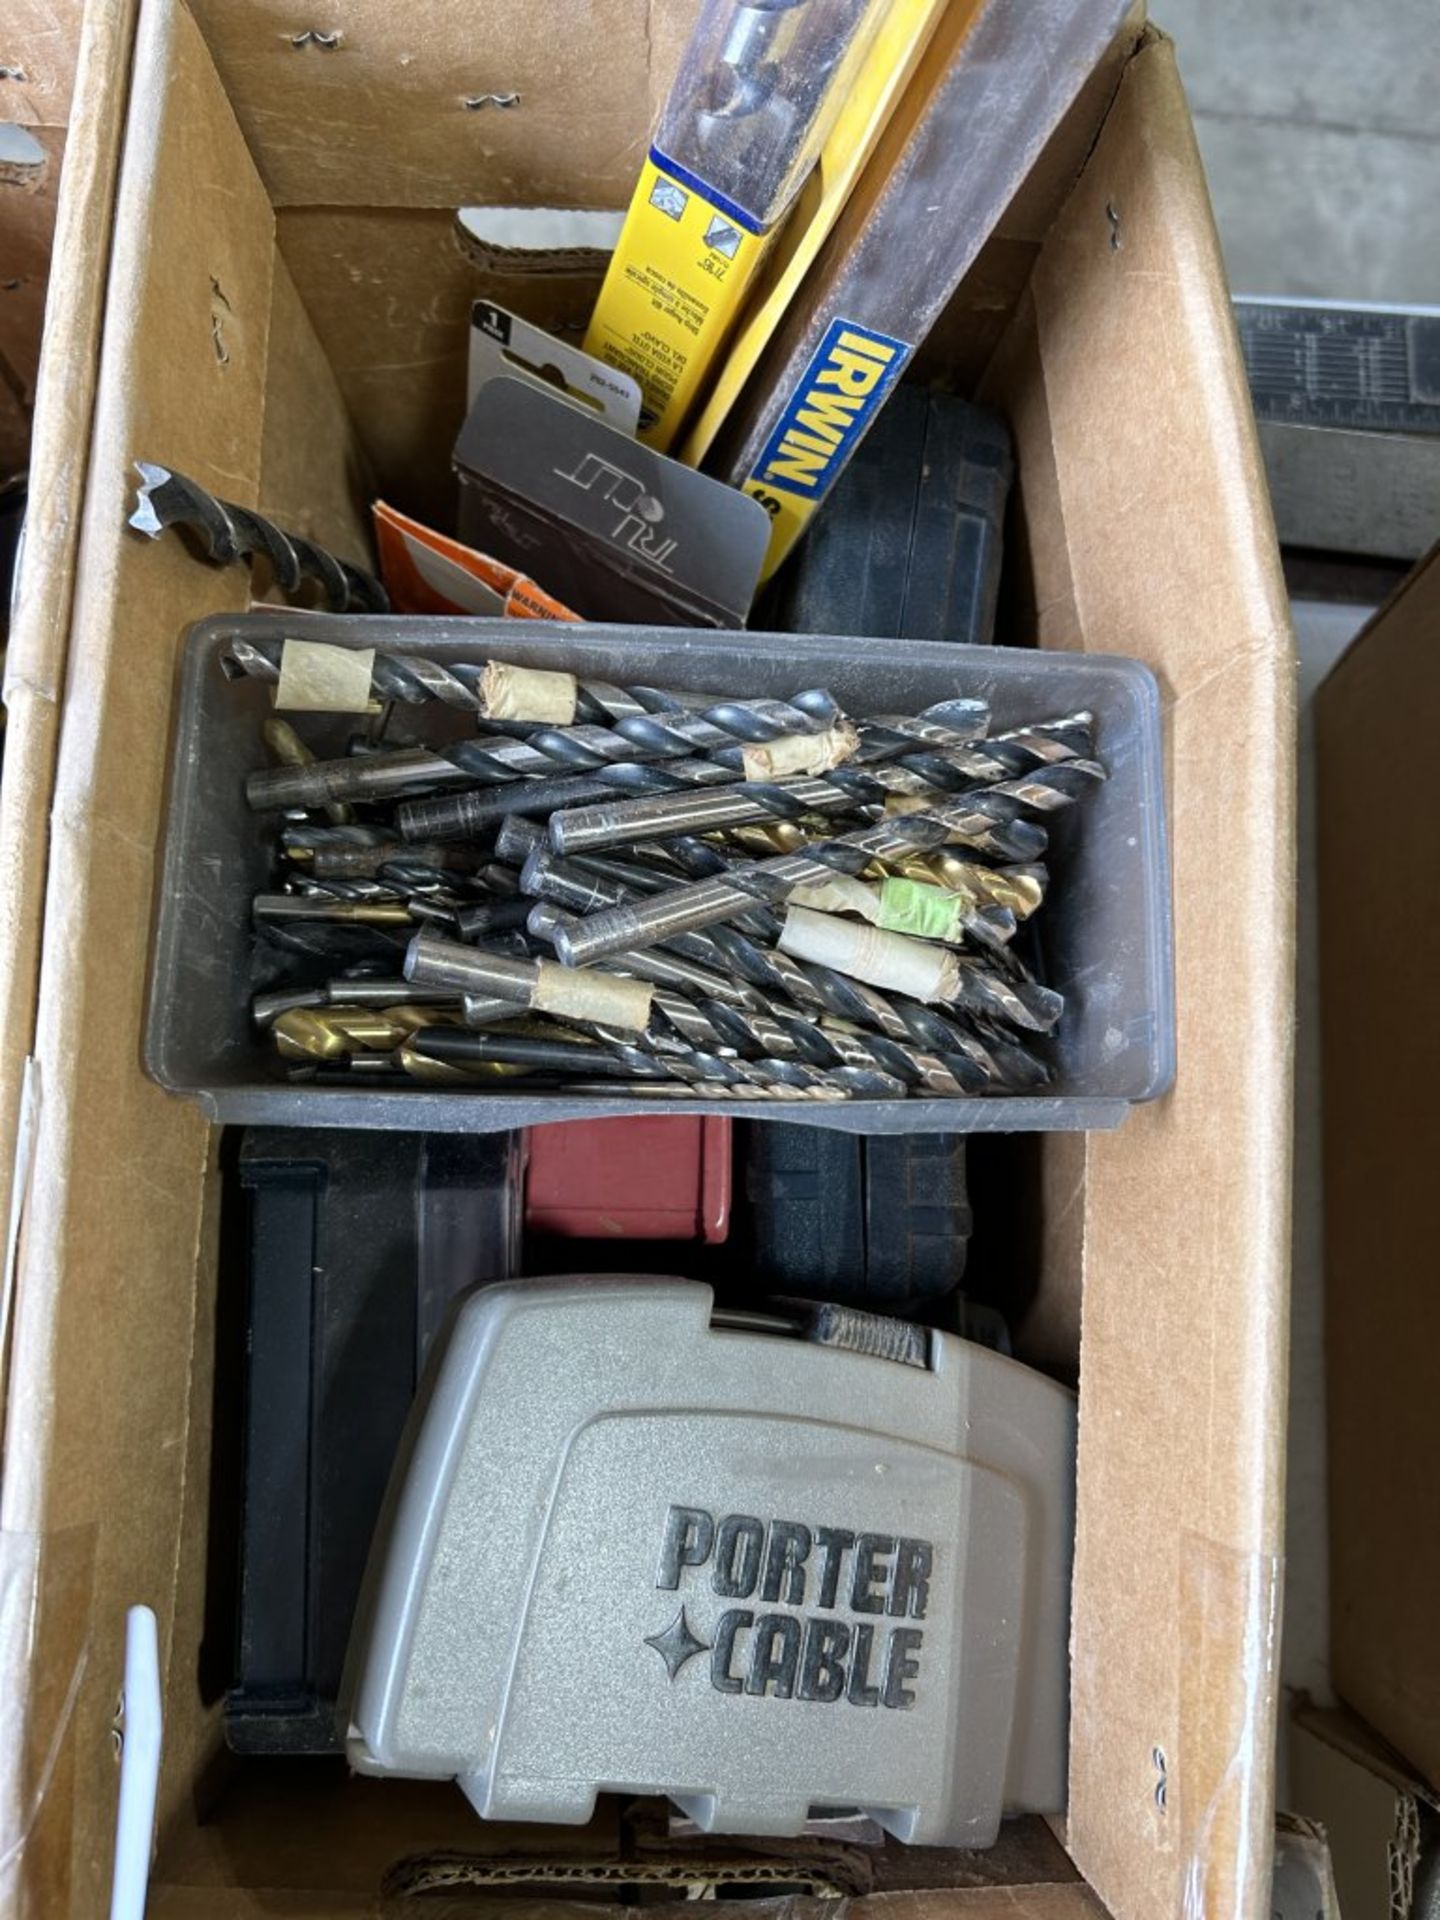 ASSORTED DRILL BITS, DRILL DOCTOR, CHISELS, SCREWDRIVERS, ETC. - Image 7 of 10